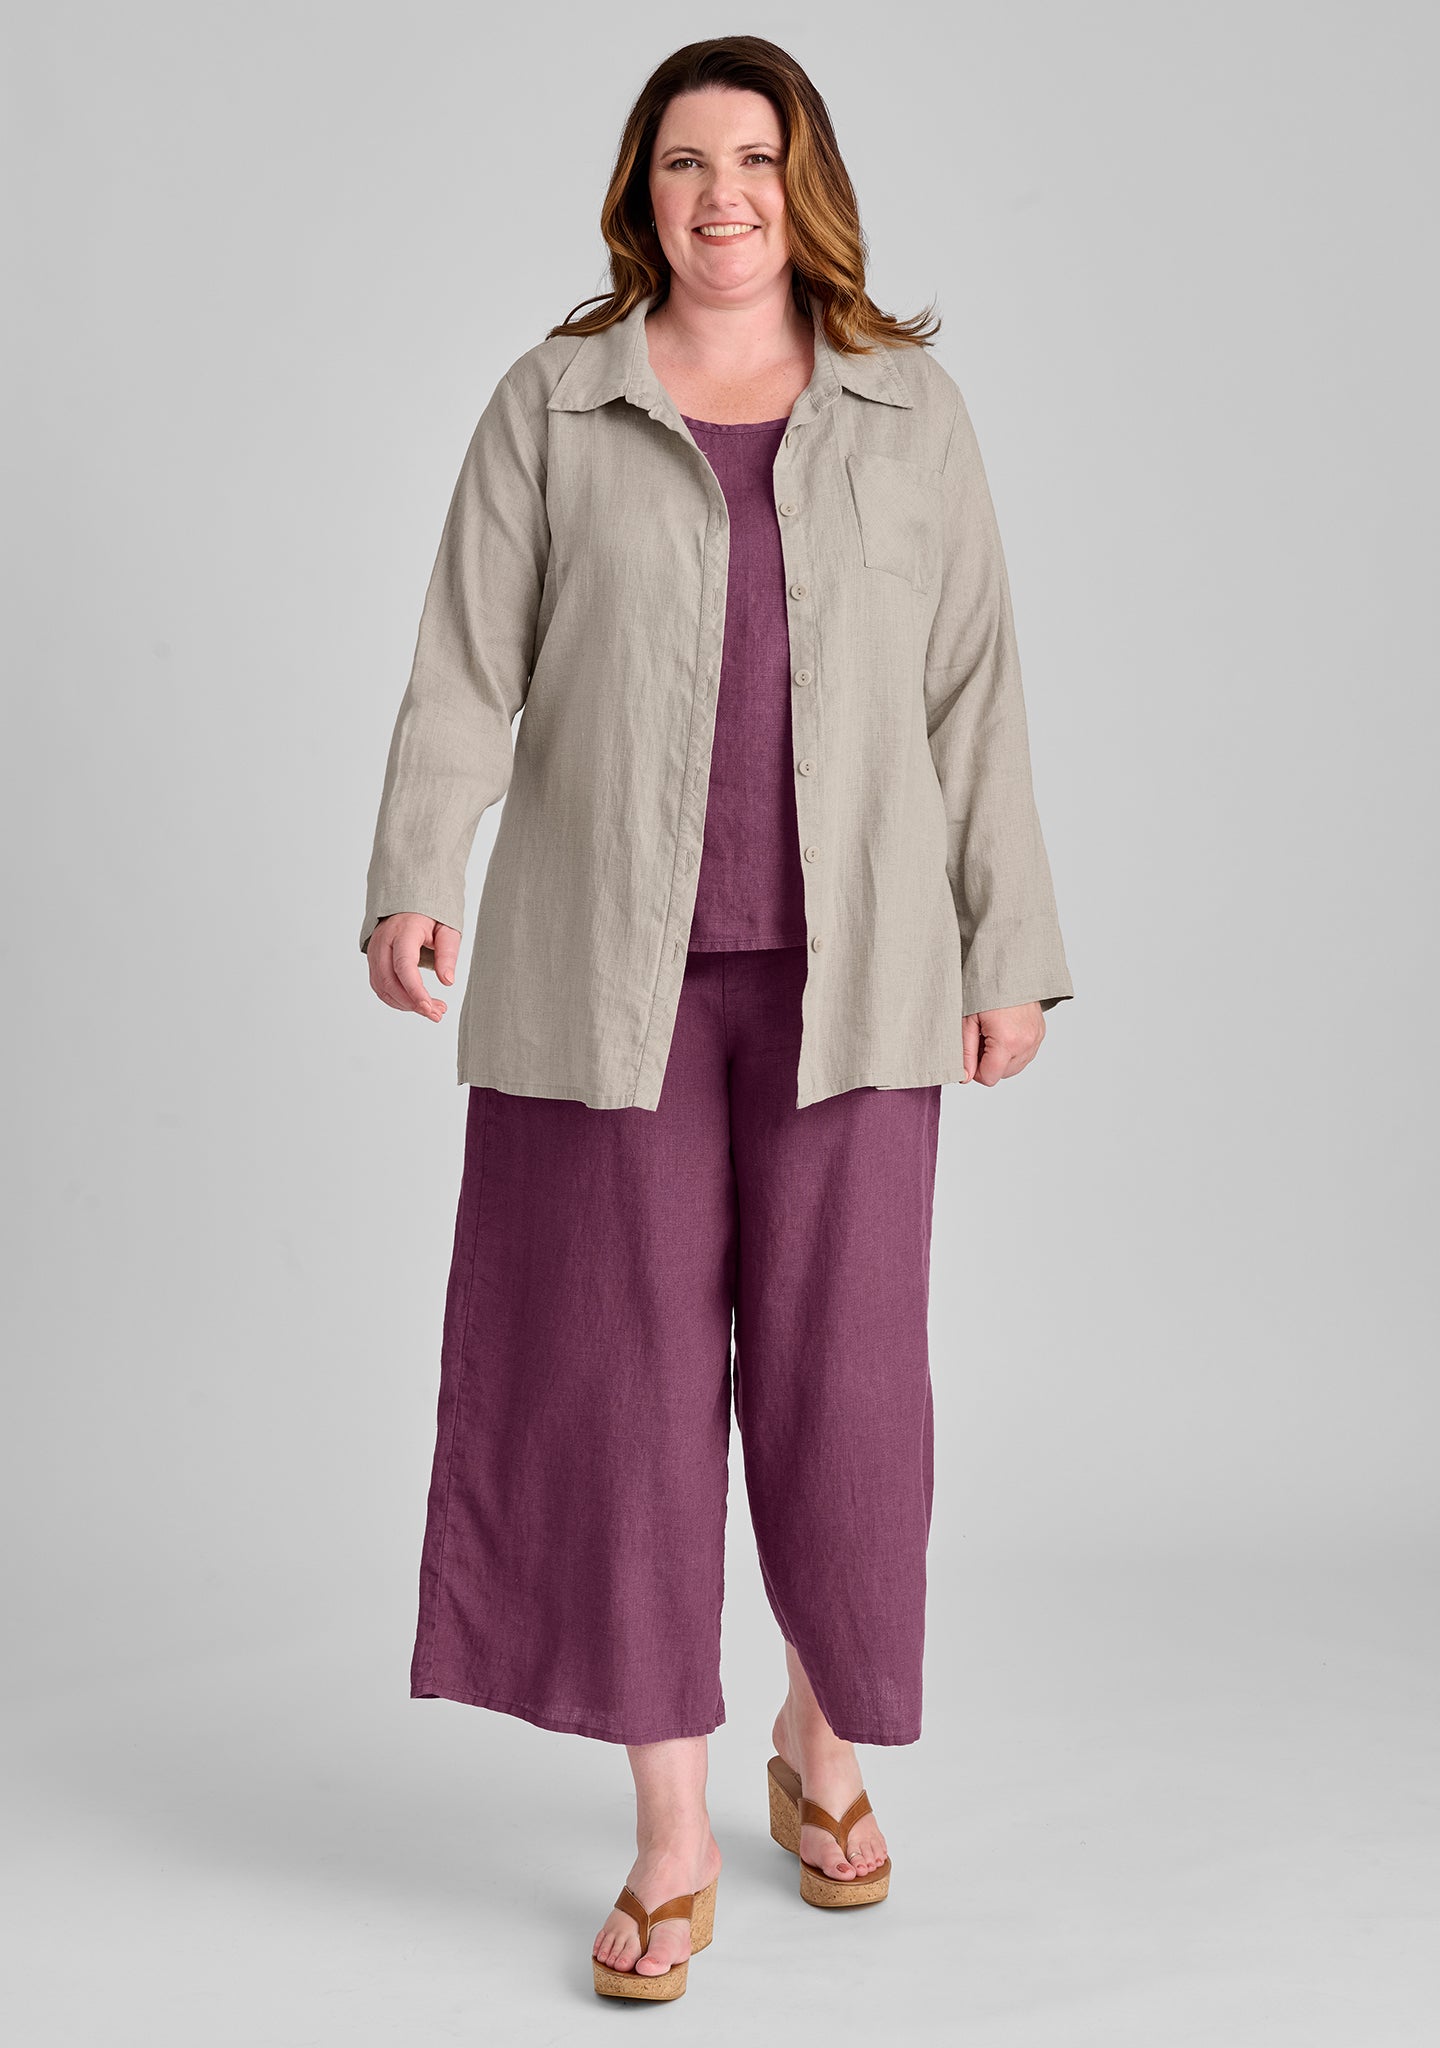 FLAX linen blouse in natural with linen tank in purple and linen pants in purple